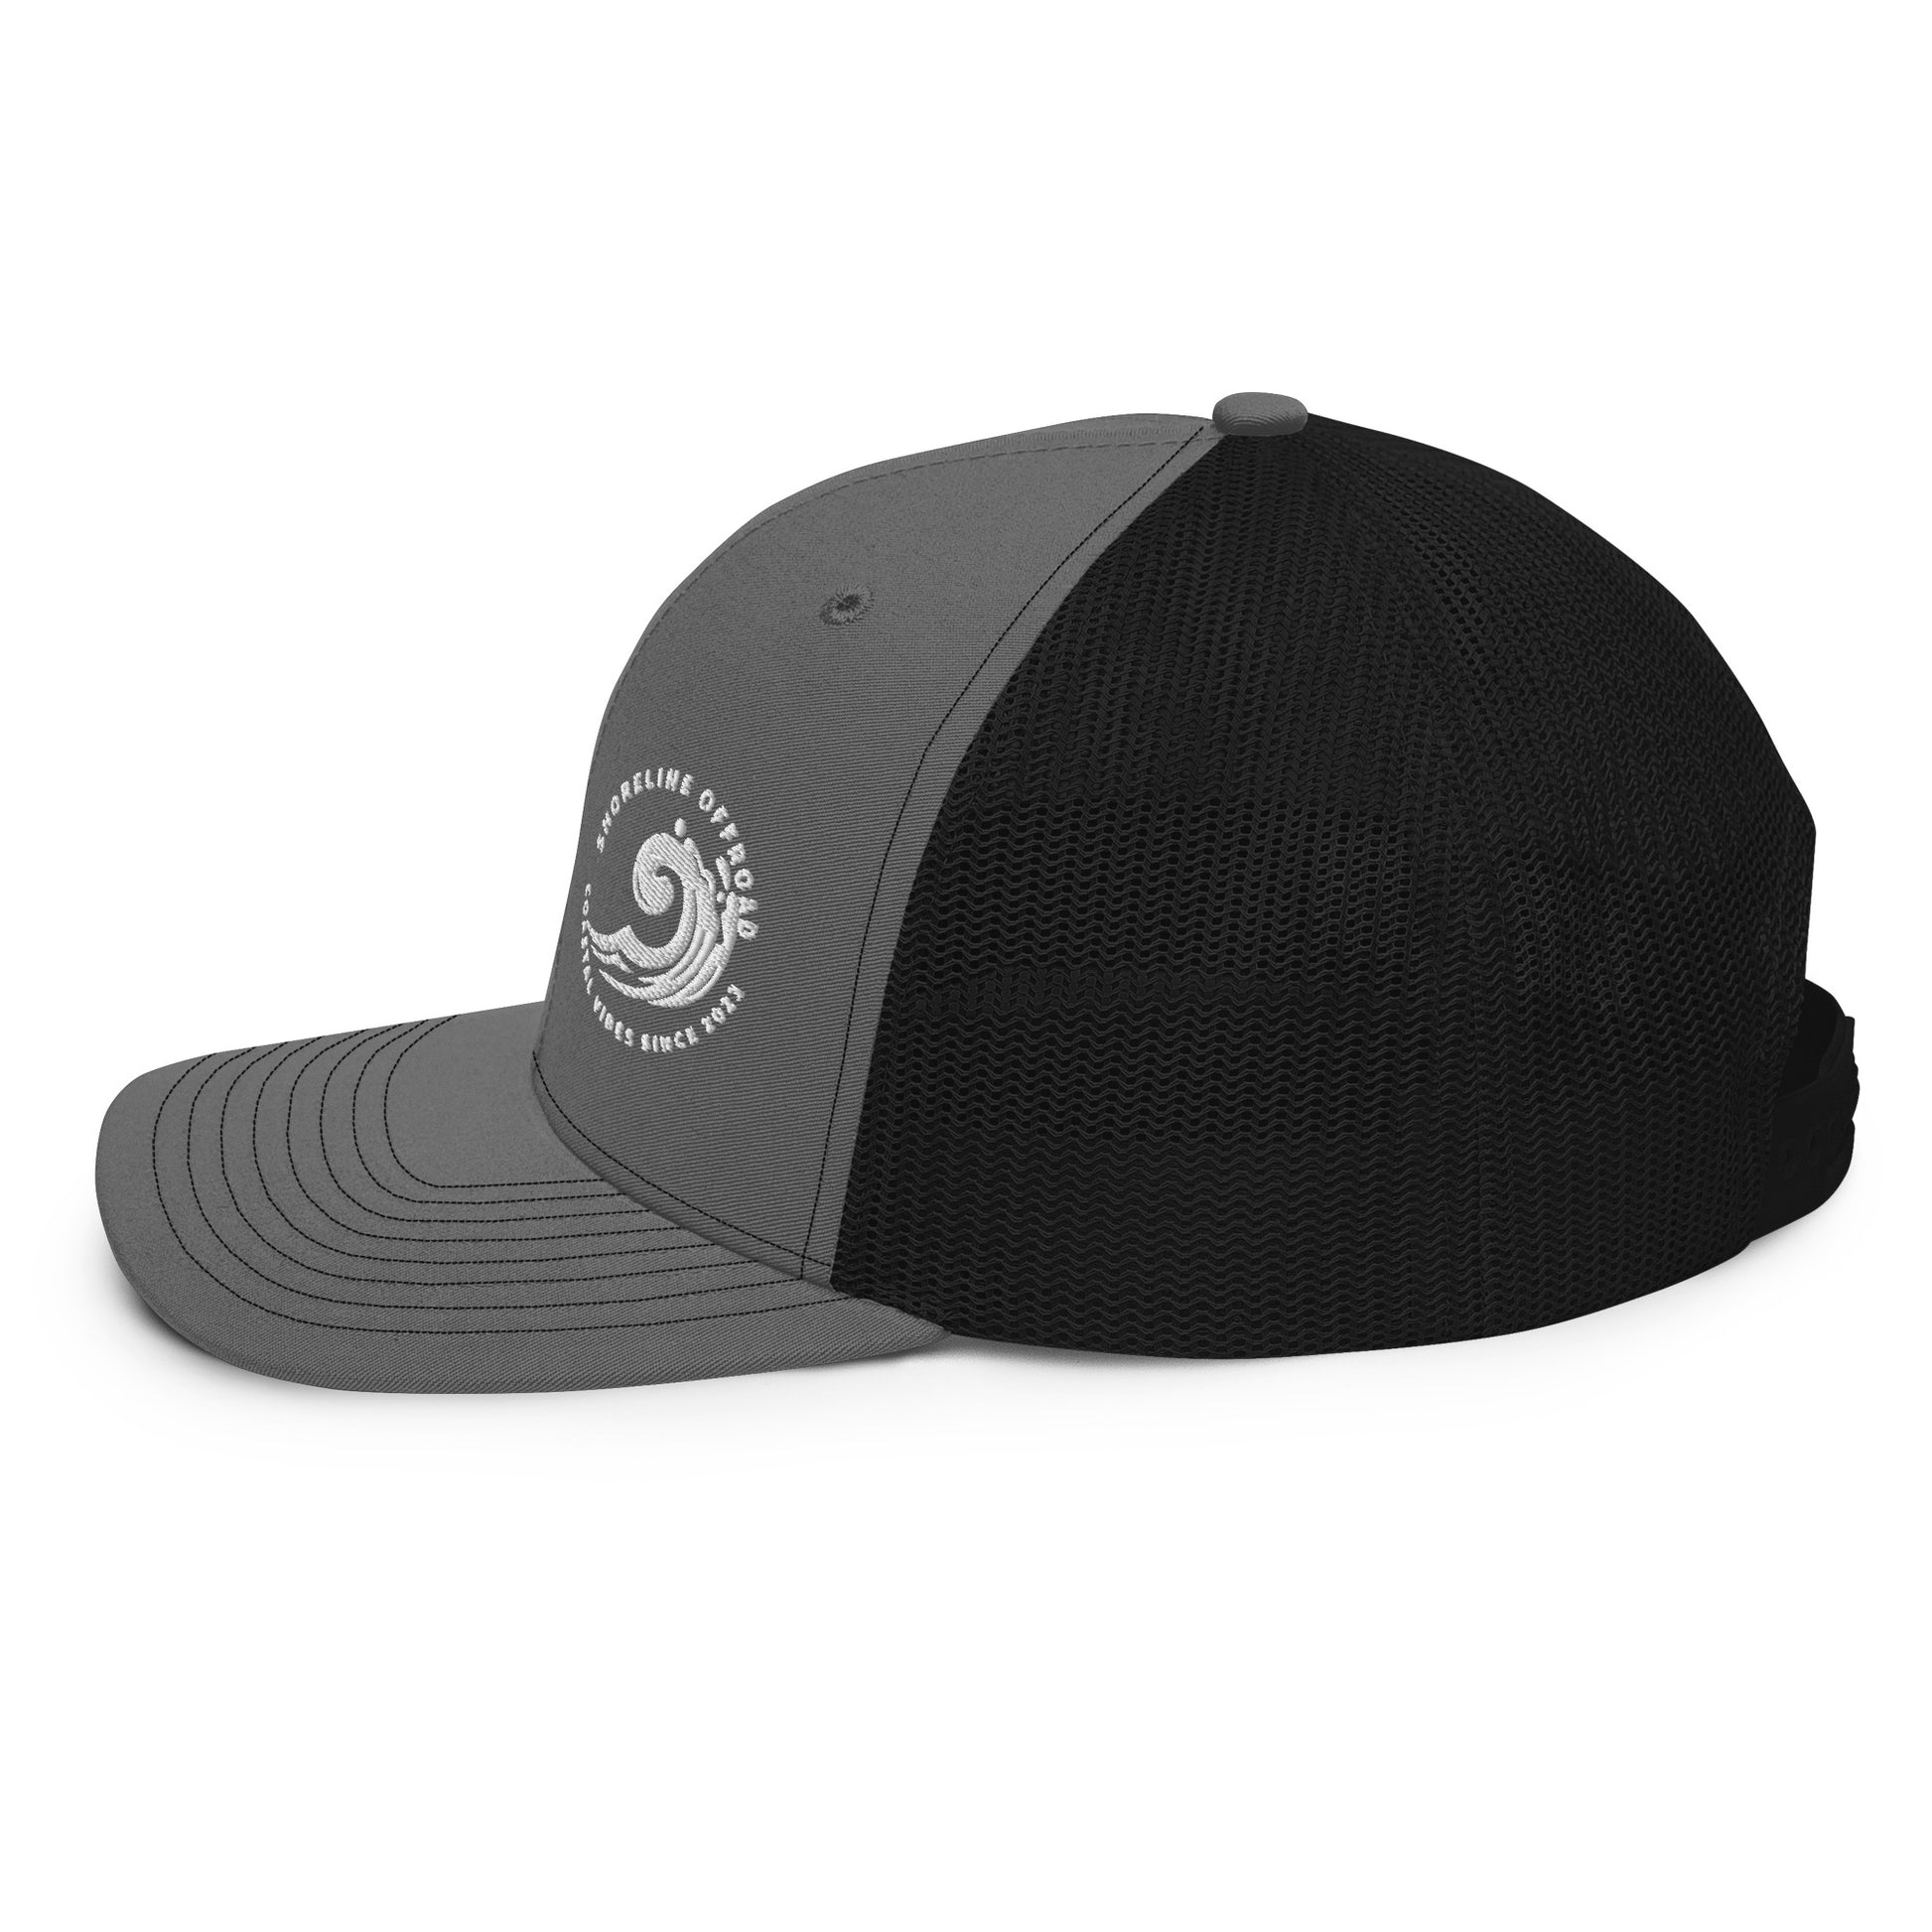 a black and grey hat with a white logo